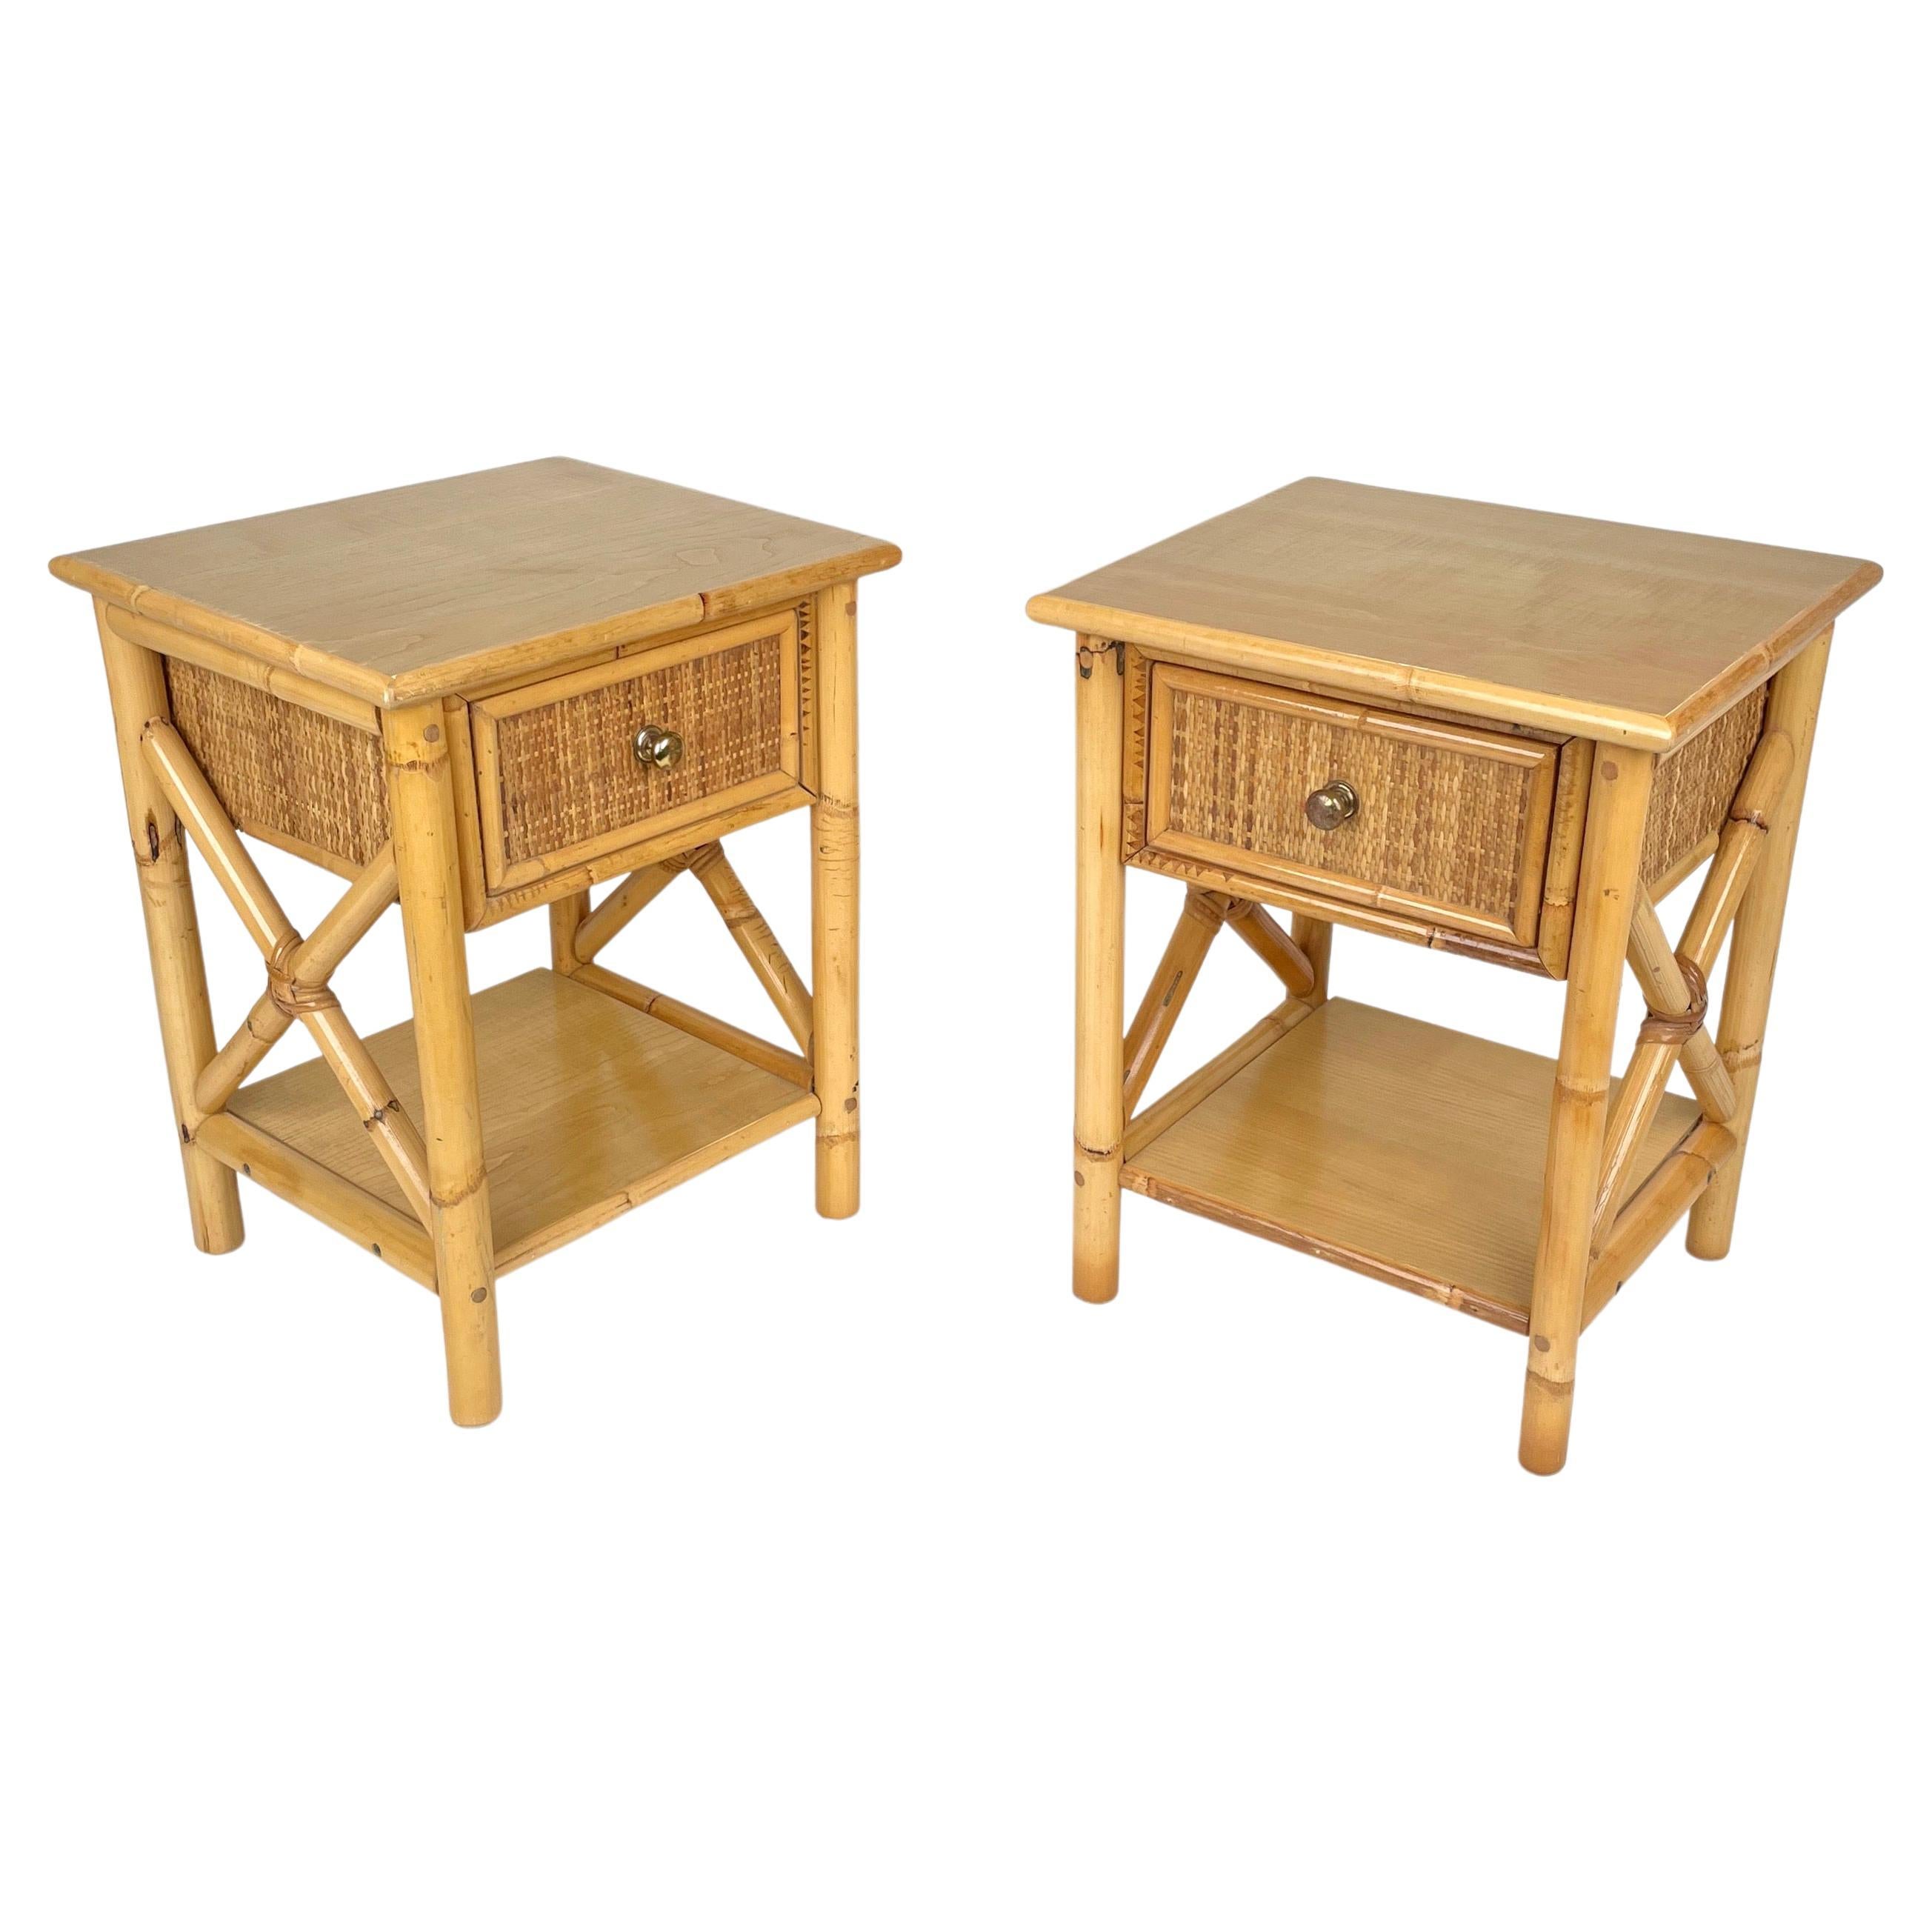 Pair of Bed Side Tables in Bamboo, Rattan & Wood, Italy 1980s For Sale